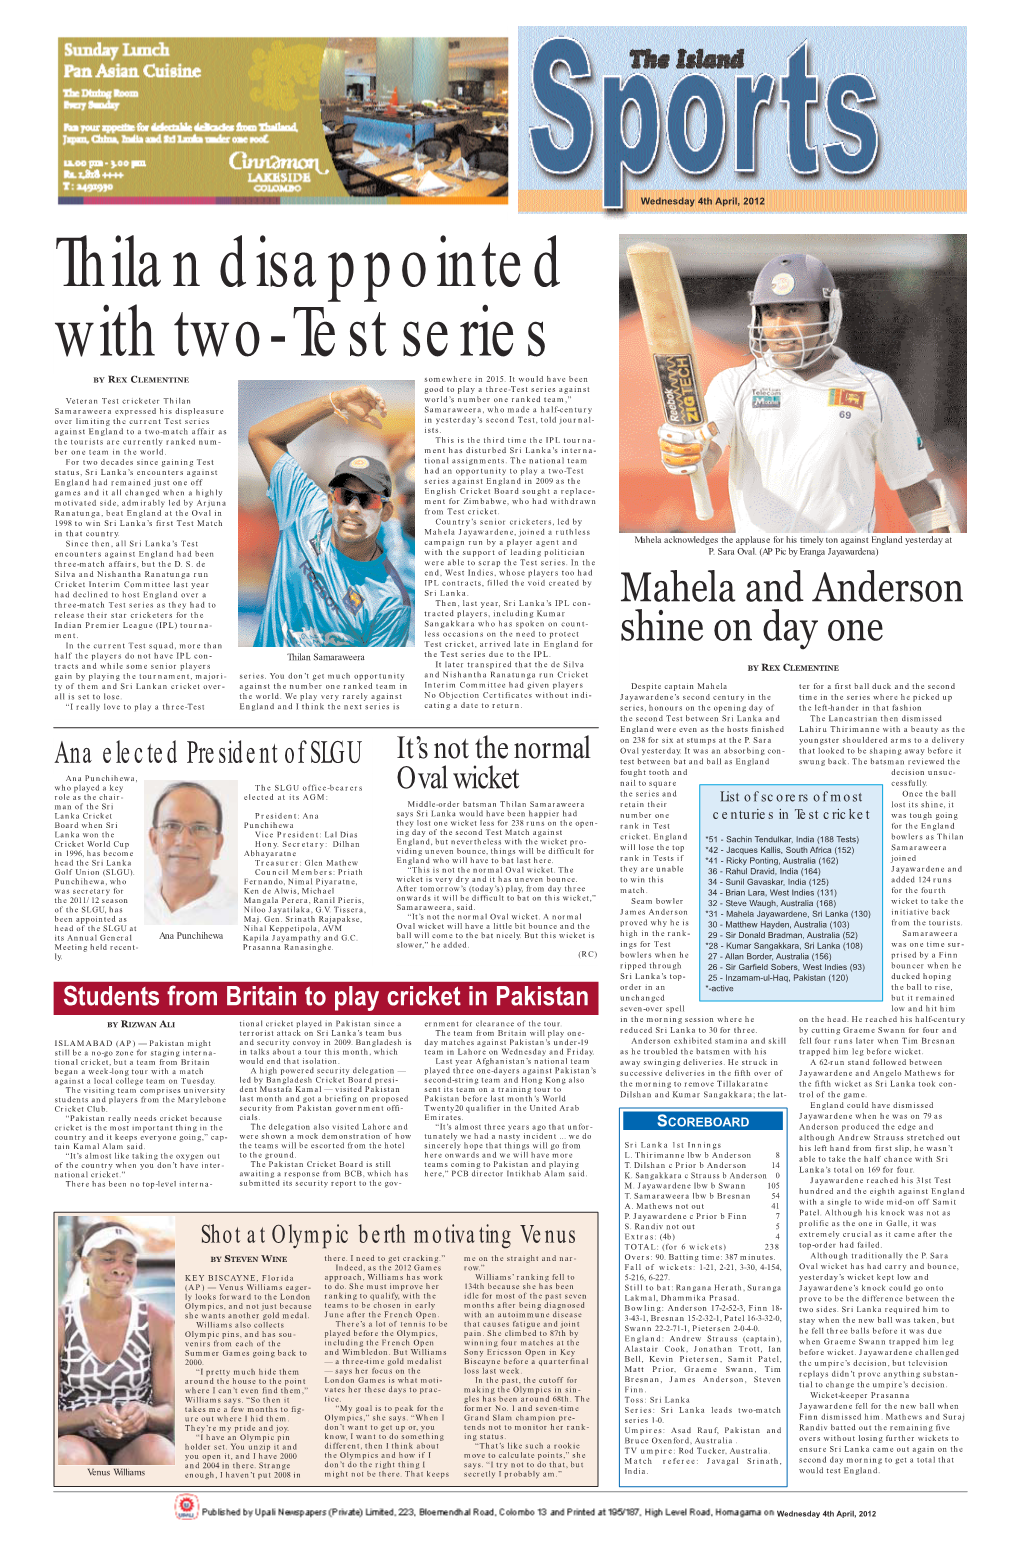 Mahela and Anderson Shine on Day